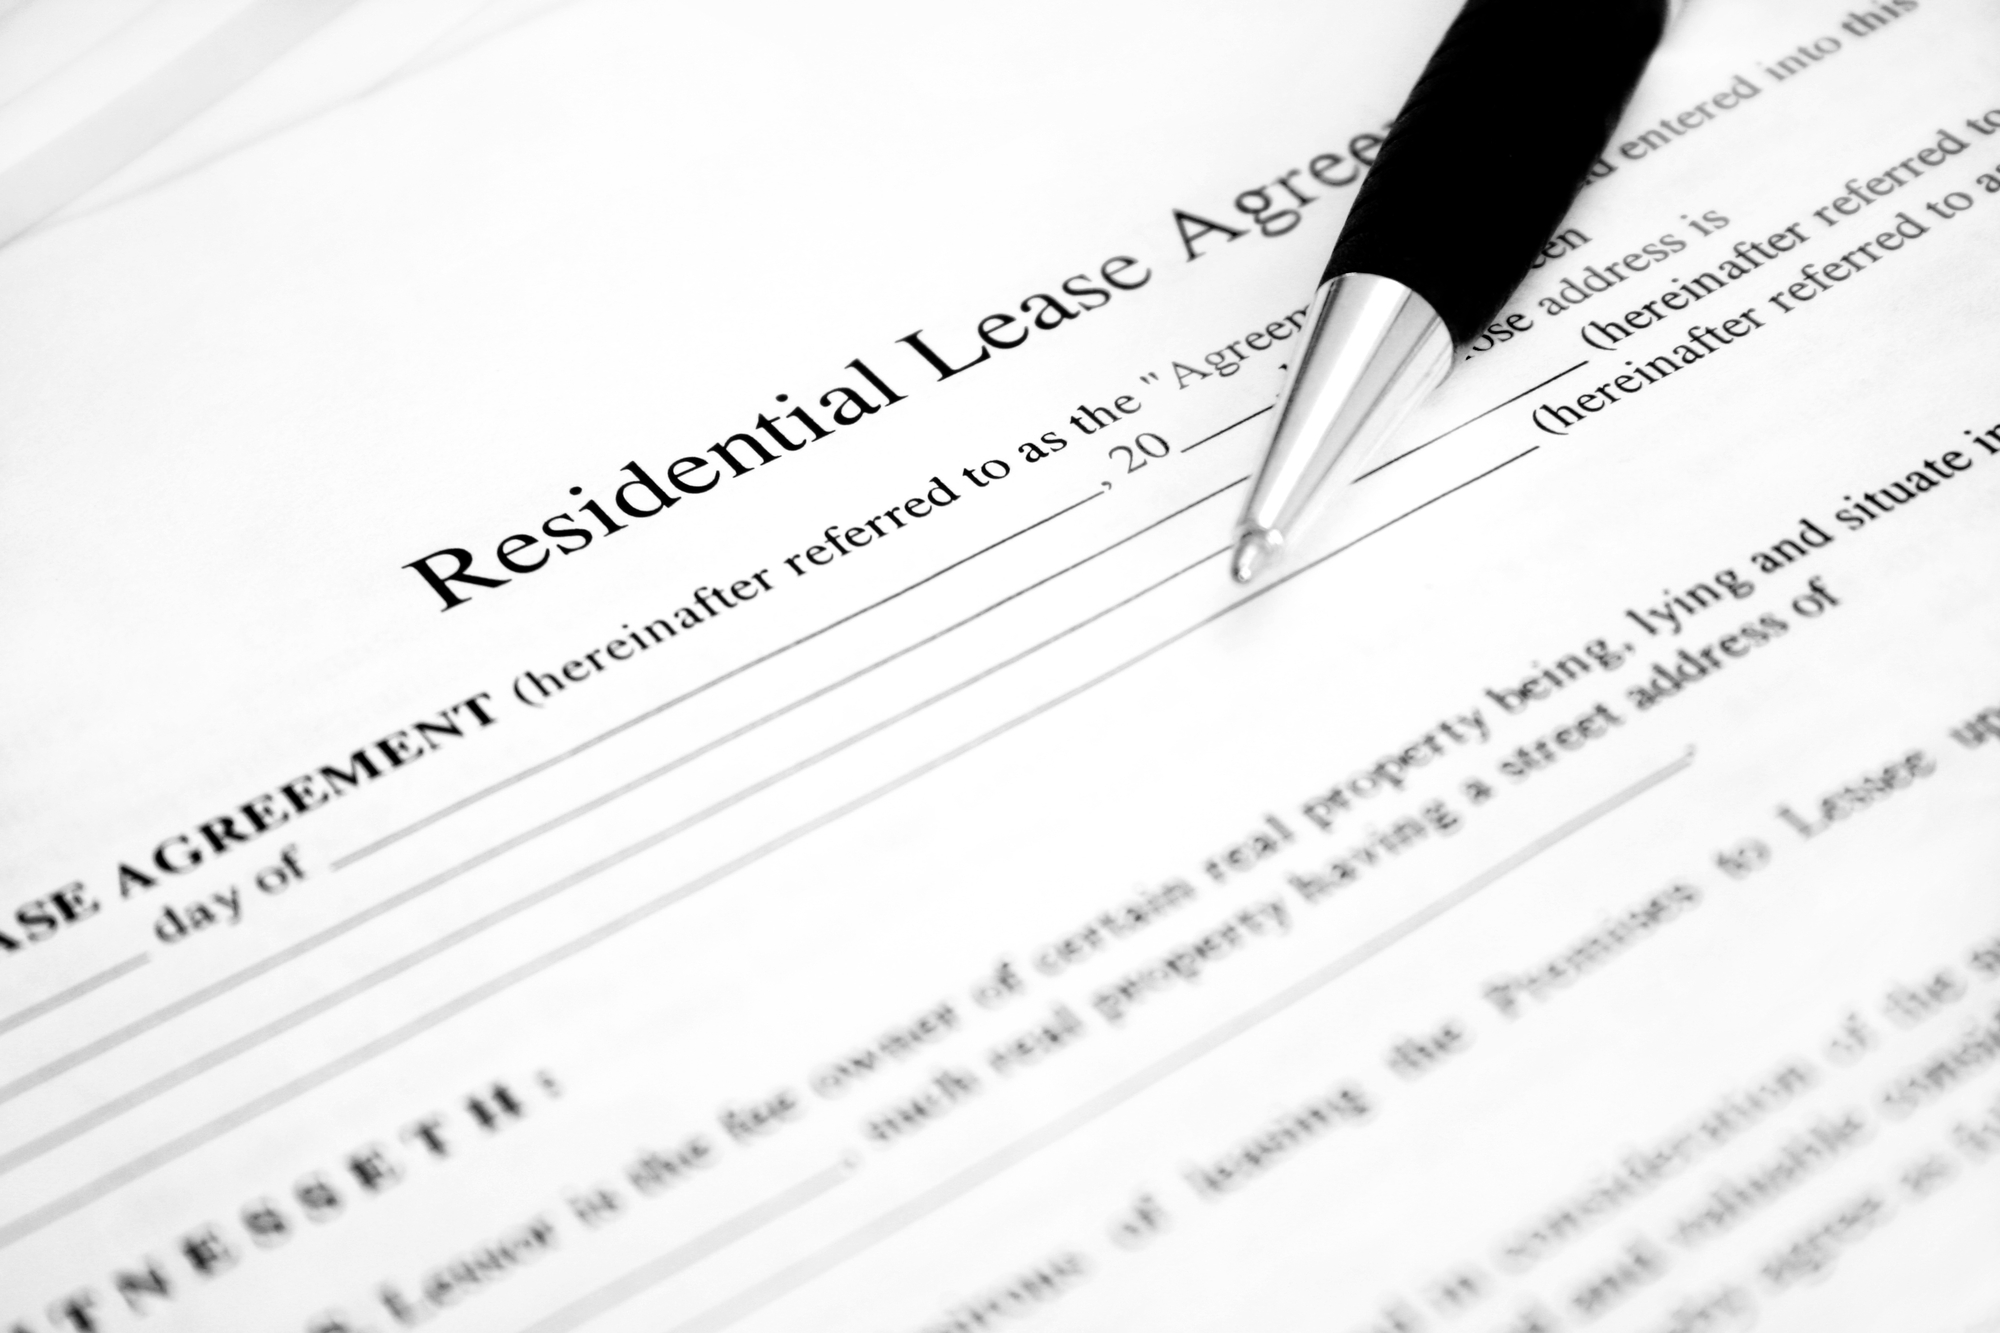 Orlando Landlords Need Strong Lease Agreement! Don't Forget to Include These Details